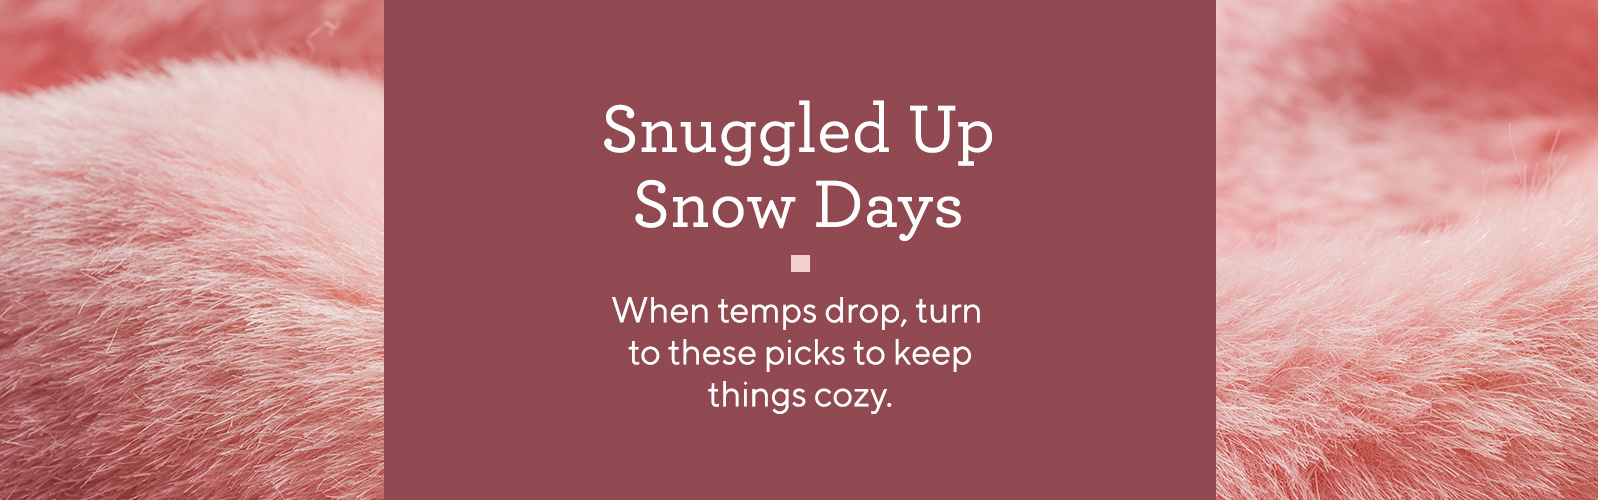 Snuggled Up Snow Days.  When temps drop, turn to these picks to keep things cozy.